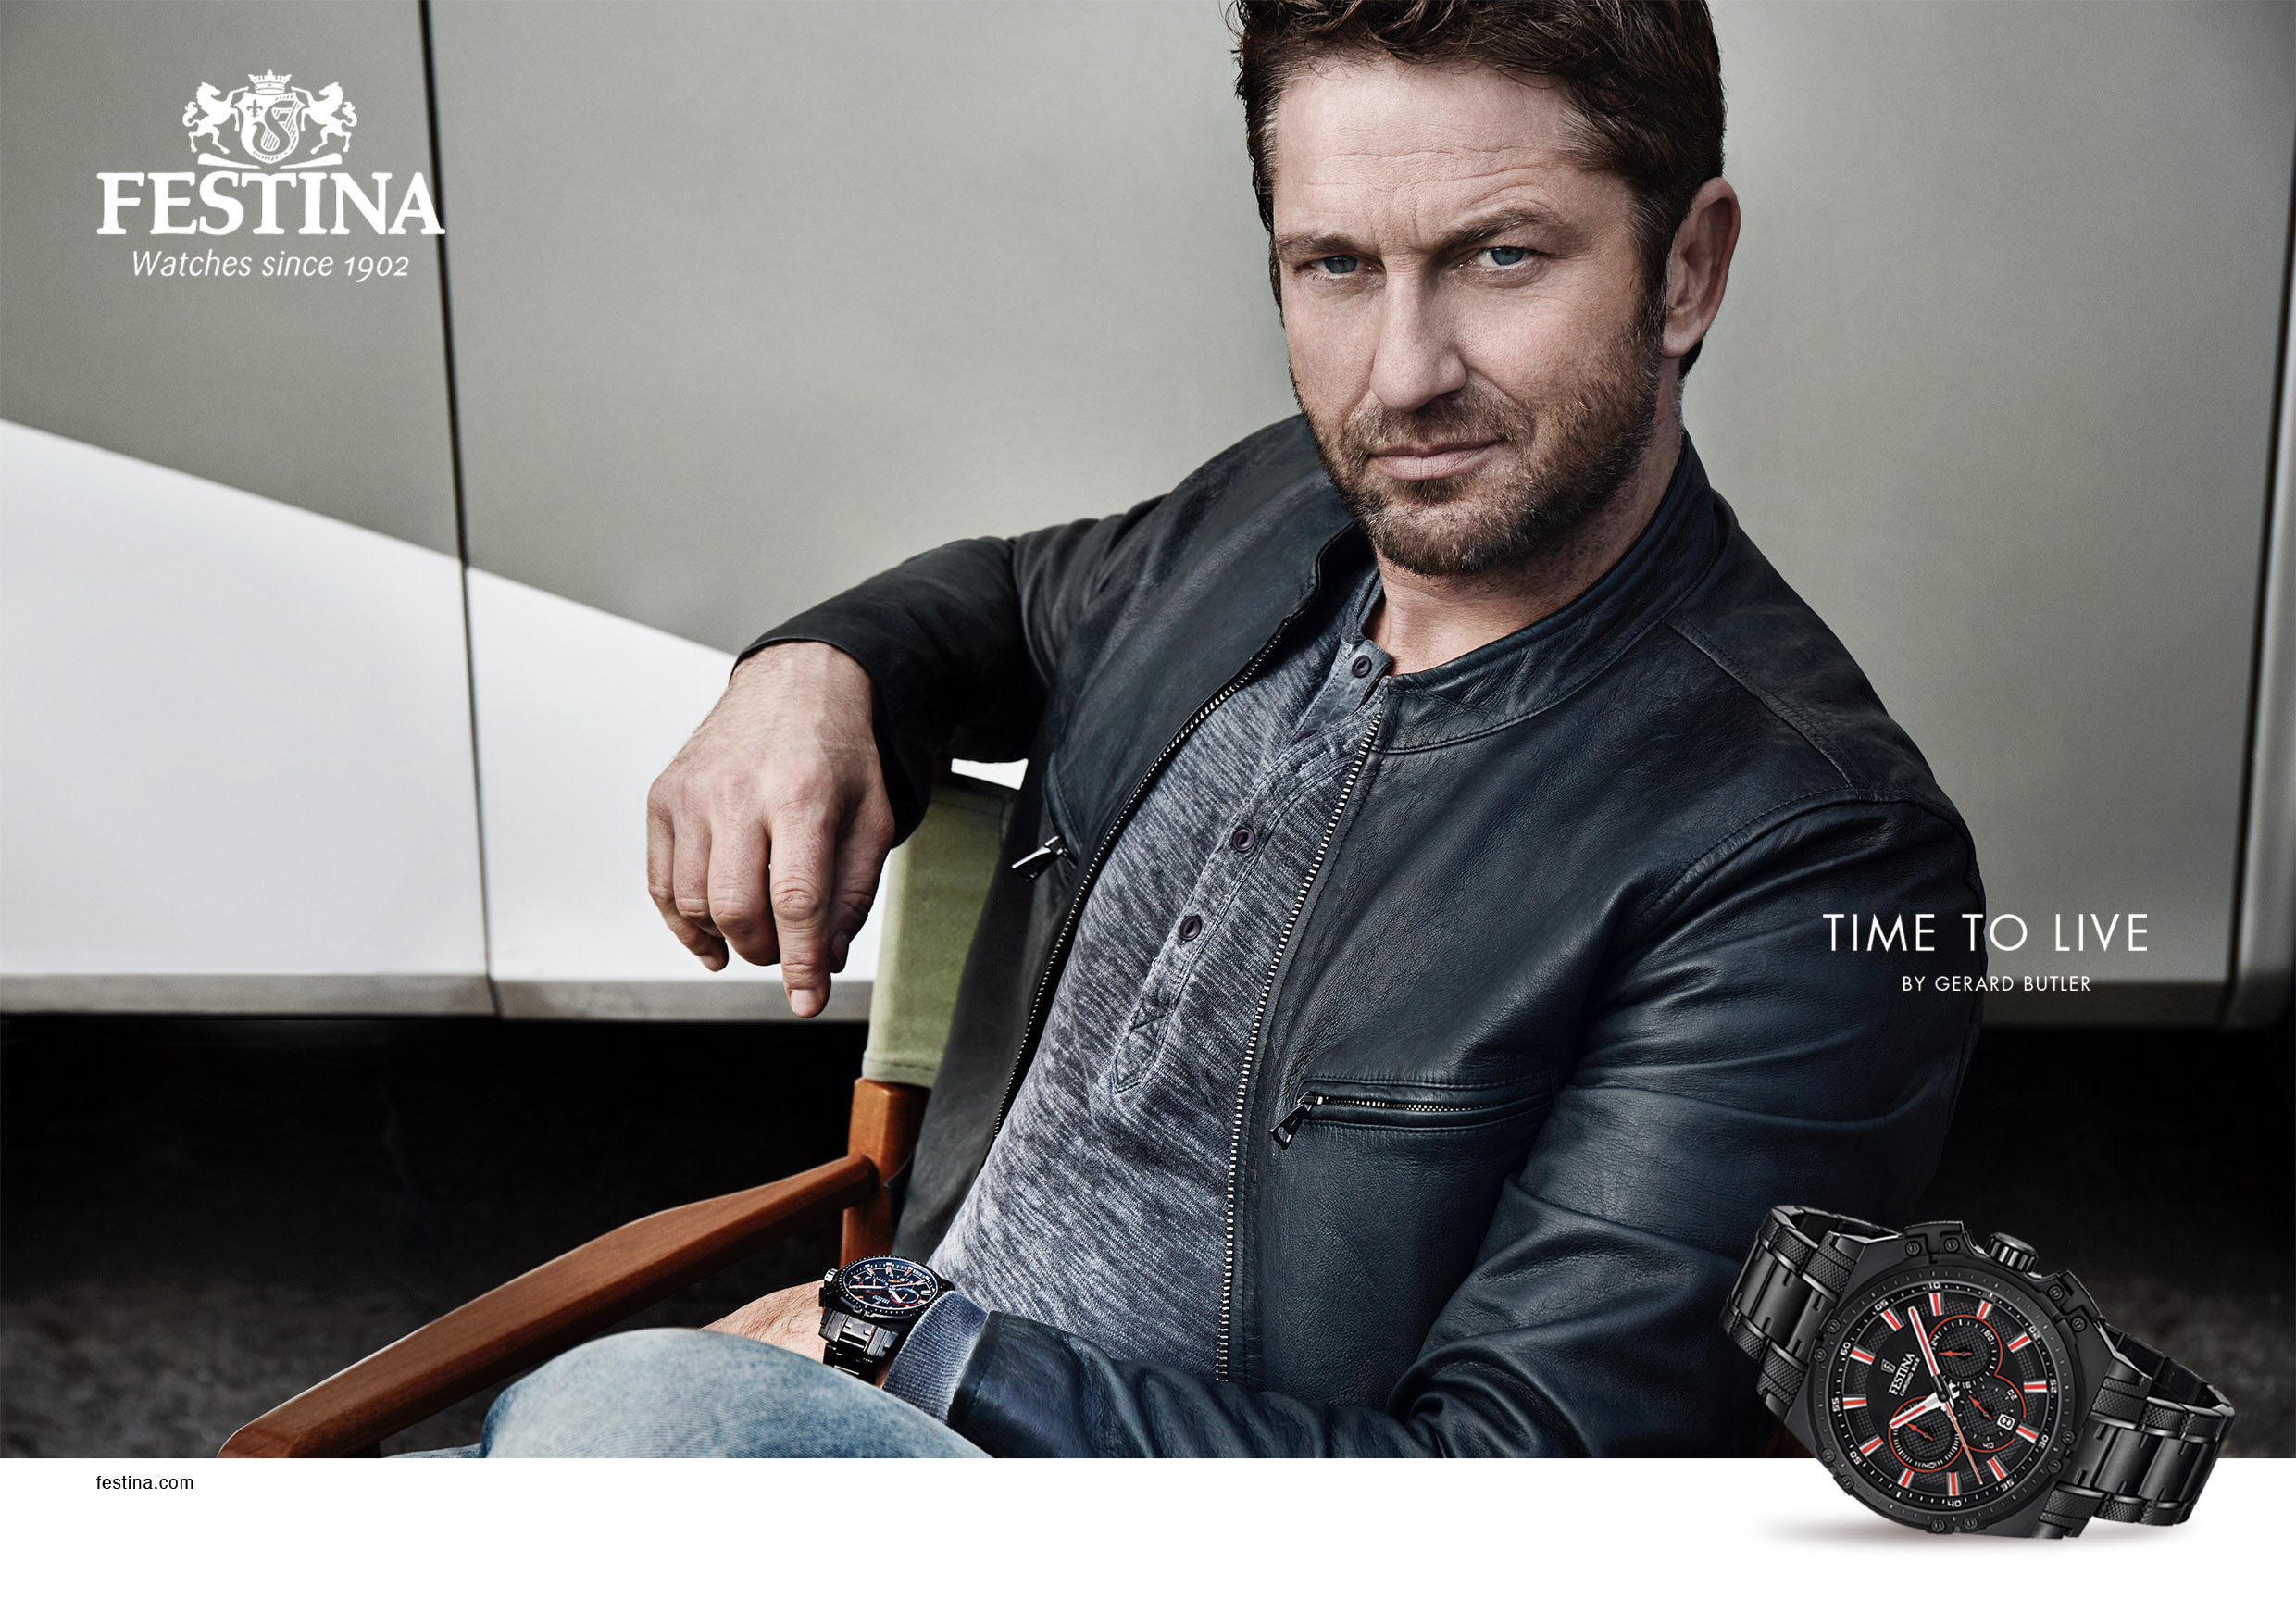 Festina Watches By Gerard Butler “Time to Live”